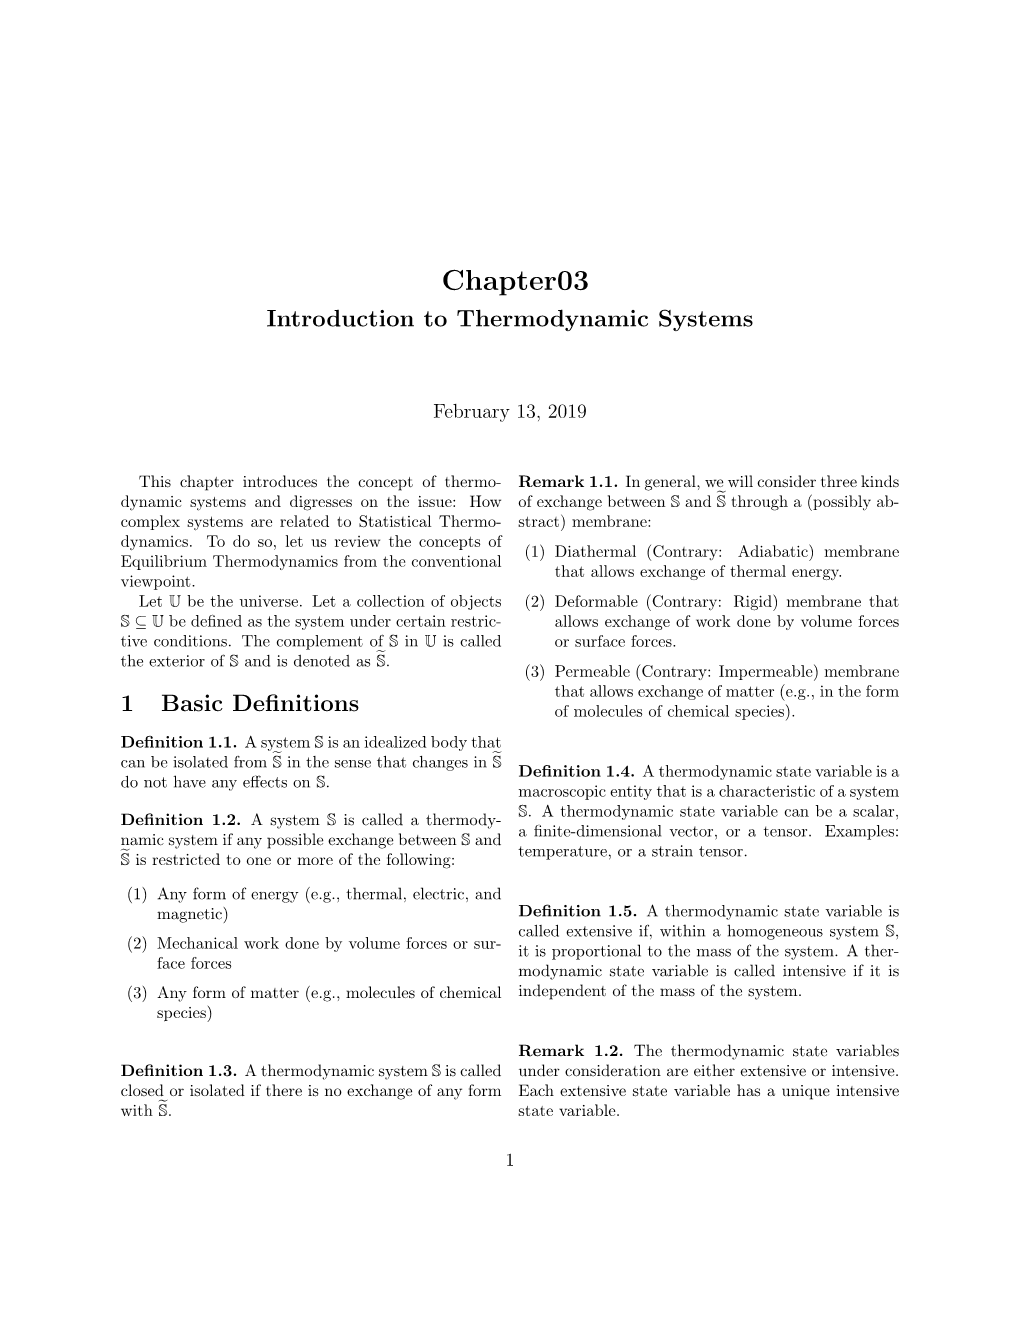 Chapter03 Introduction to Thermodynamic Systems